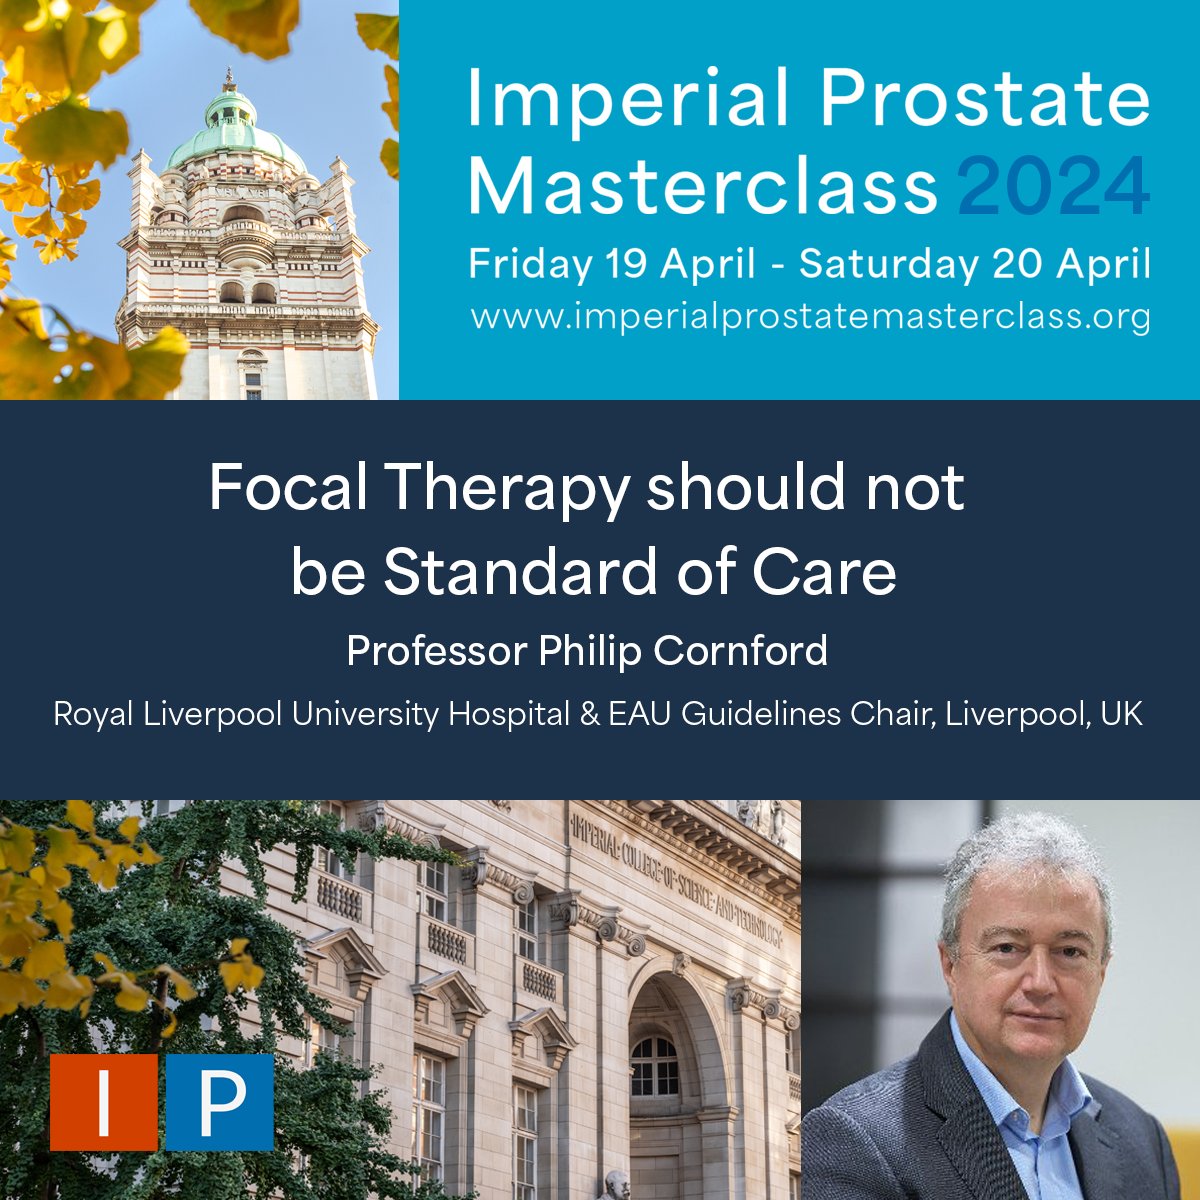 🎯 You don't want to miss Professor Philip Cornford during the Focal Therapy plenary session at #ipmasterclass24! 🔥 ⏰ View the full agenda & secure your spot at imperialprostatemasterclass.org - registrations closing in 4️⃣ DAYS, limited spaces available! 🌐 imperialprostatemasterclass.org